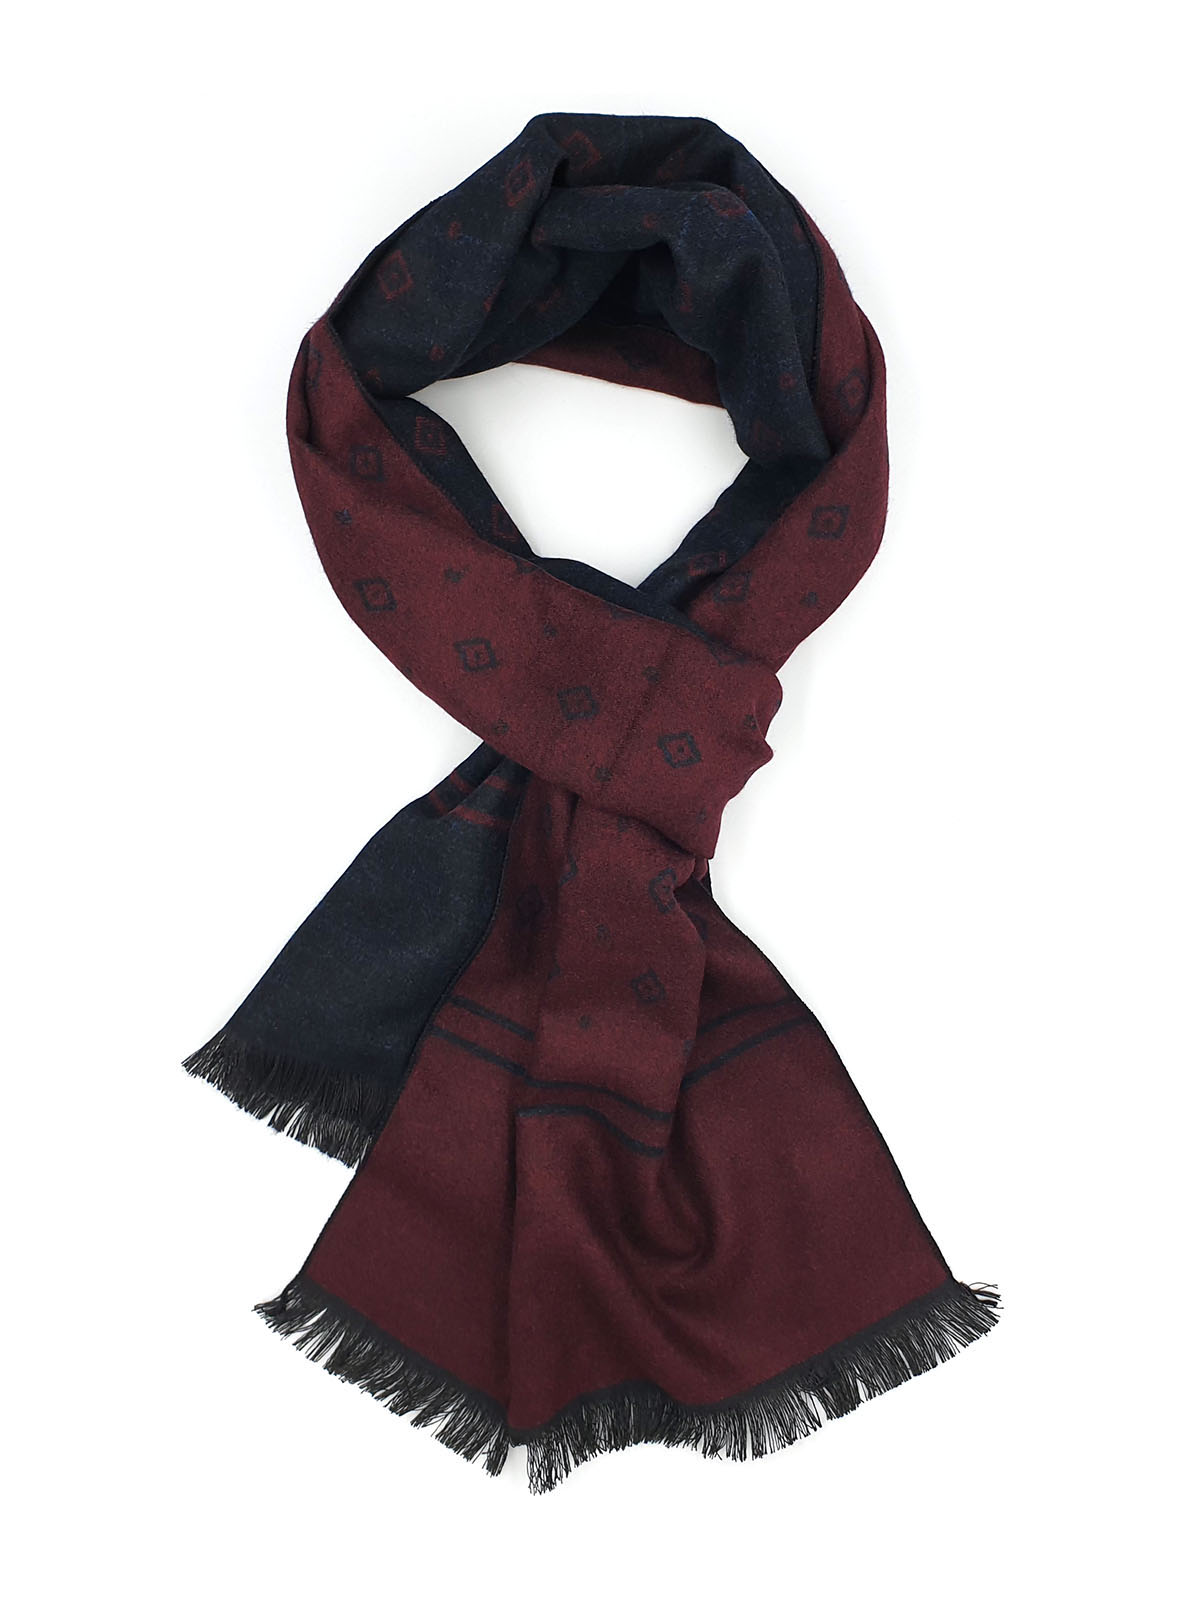 Doublesided scarf in burgundy and black - 10329 - € 19.68 img4